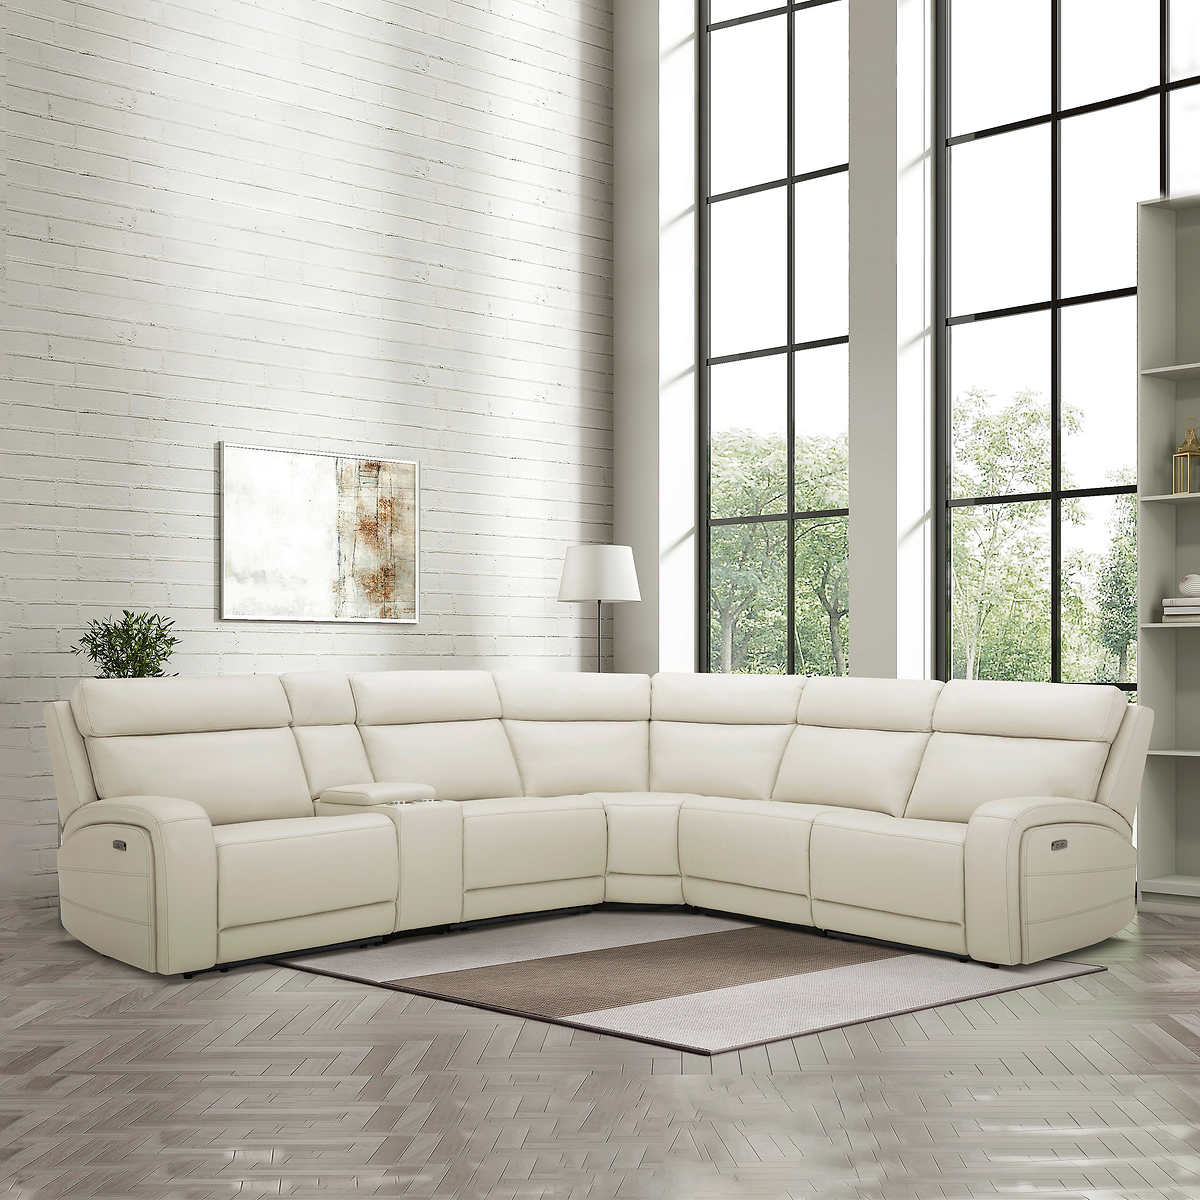 Leather Power Reclining Sectional, Leather Reclining Sectional With Cup Holders